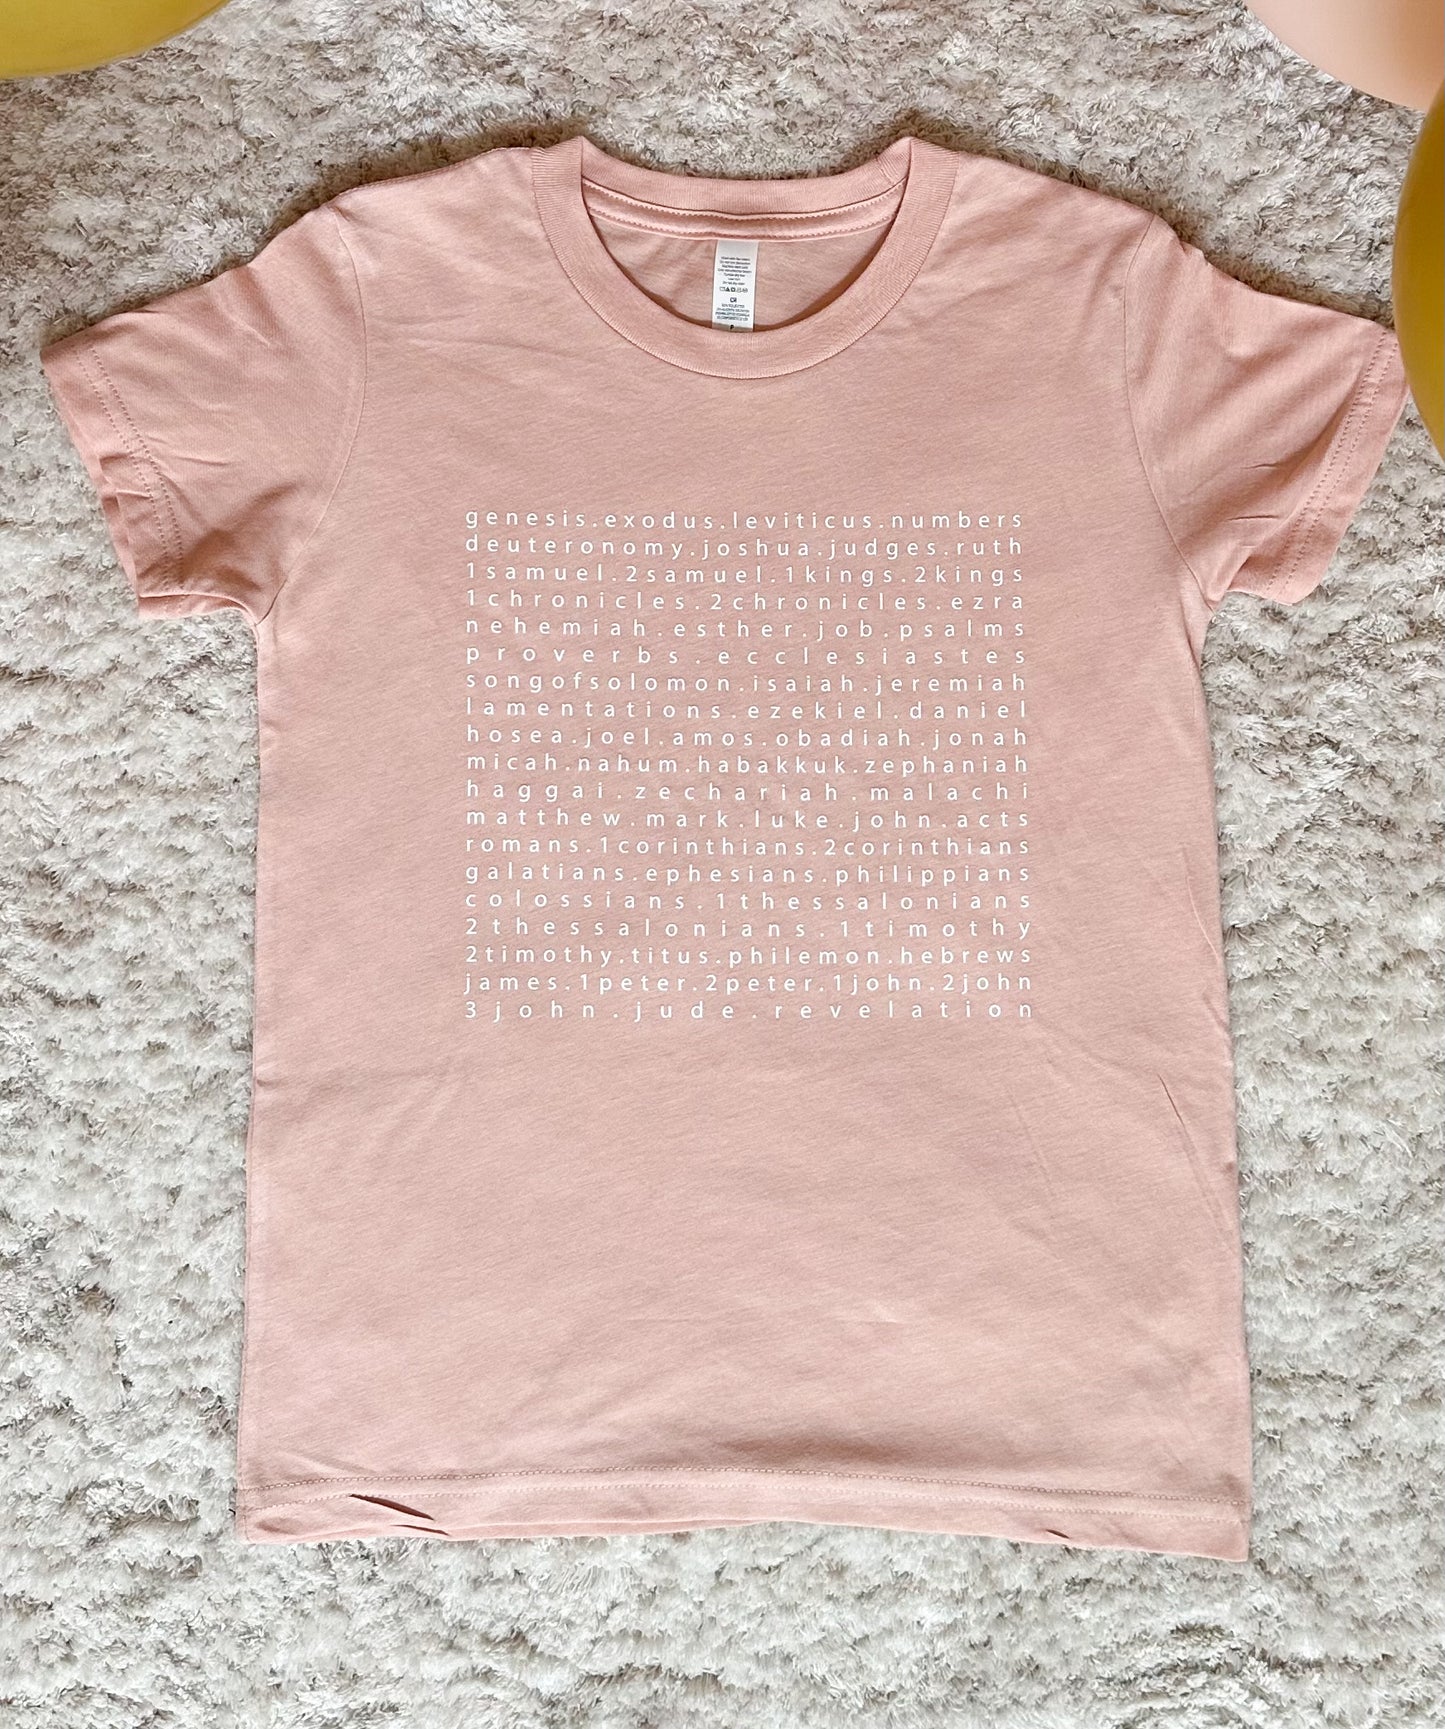 Toddler Books of the Bible Tee in Peach